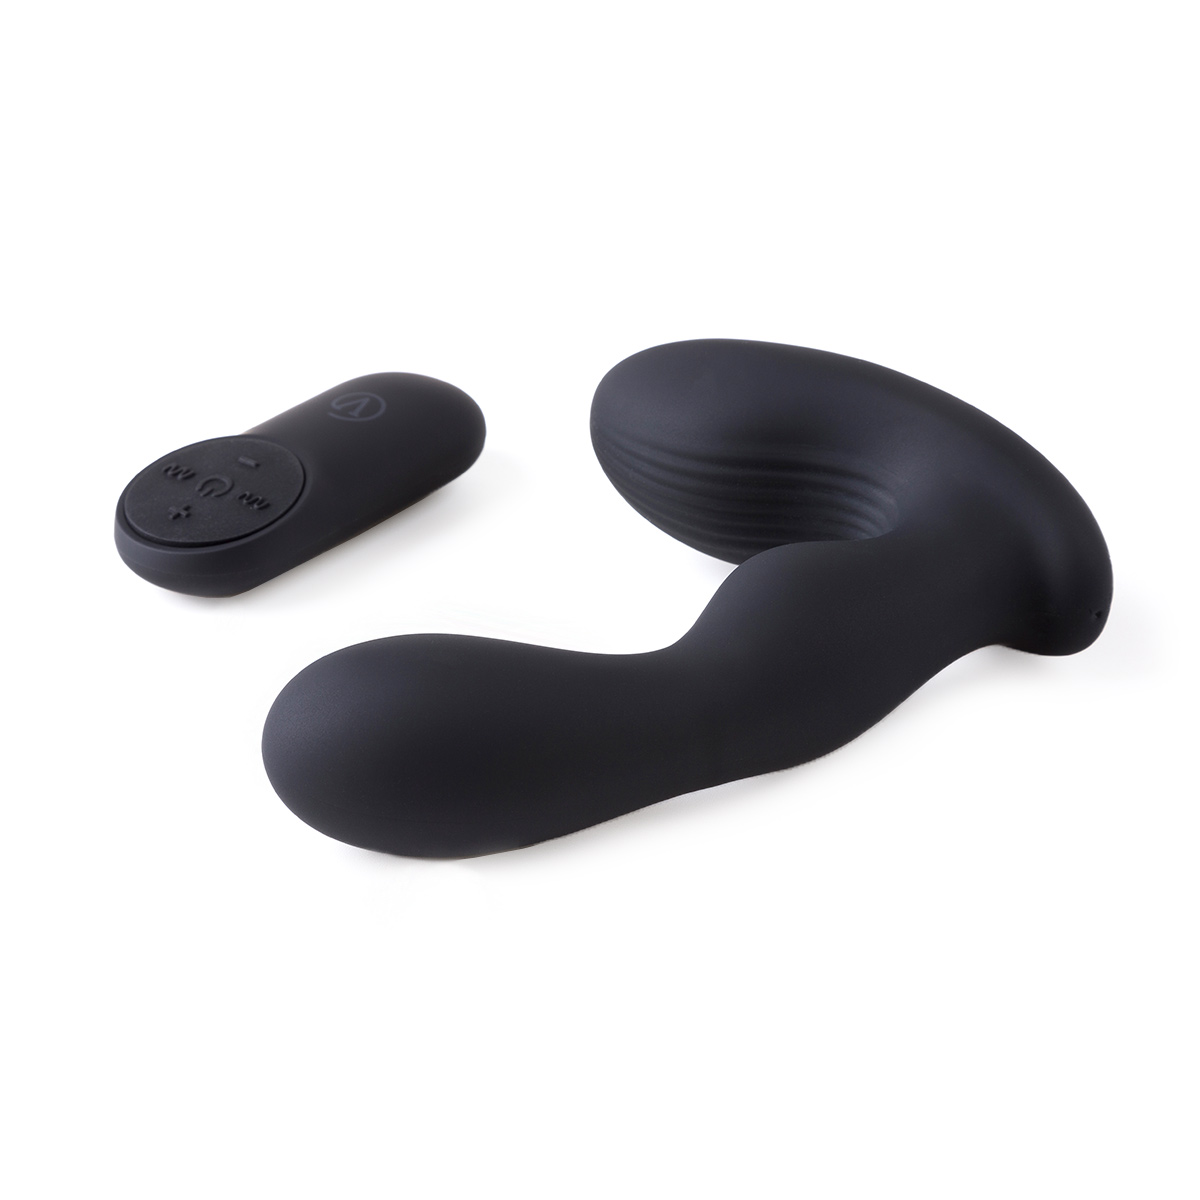 Moving-Prostate-Massager-with-Remote-P1-OPR-3090098-1